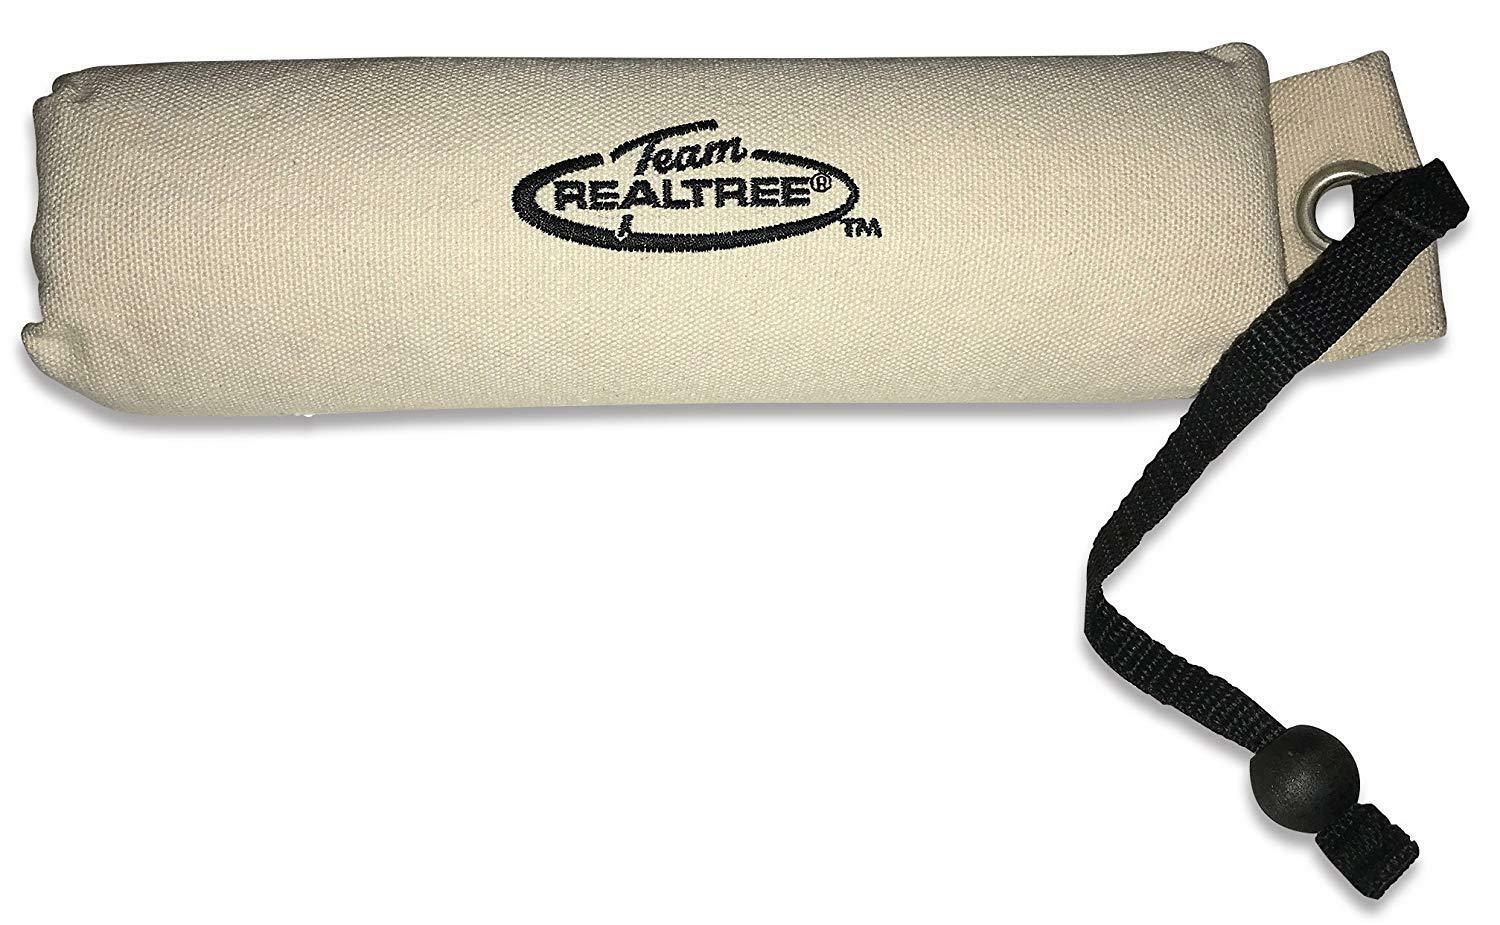 3" Large Team Realtree Canvas Dog/puppy Training Hunting Throwing Dummy Floats